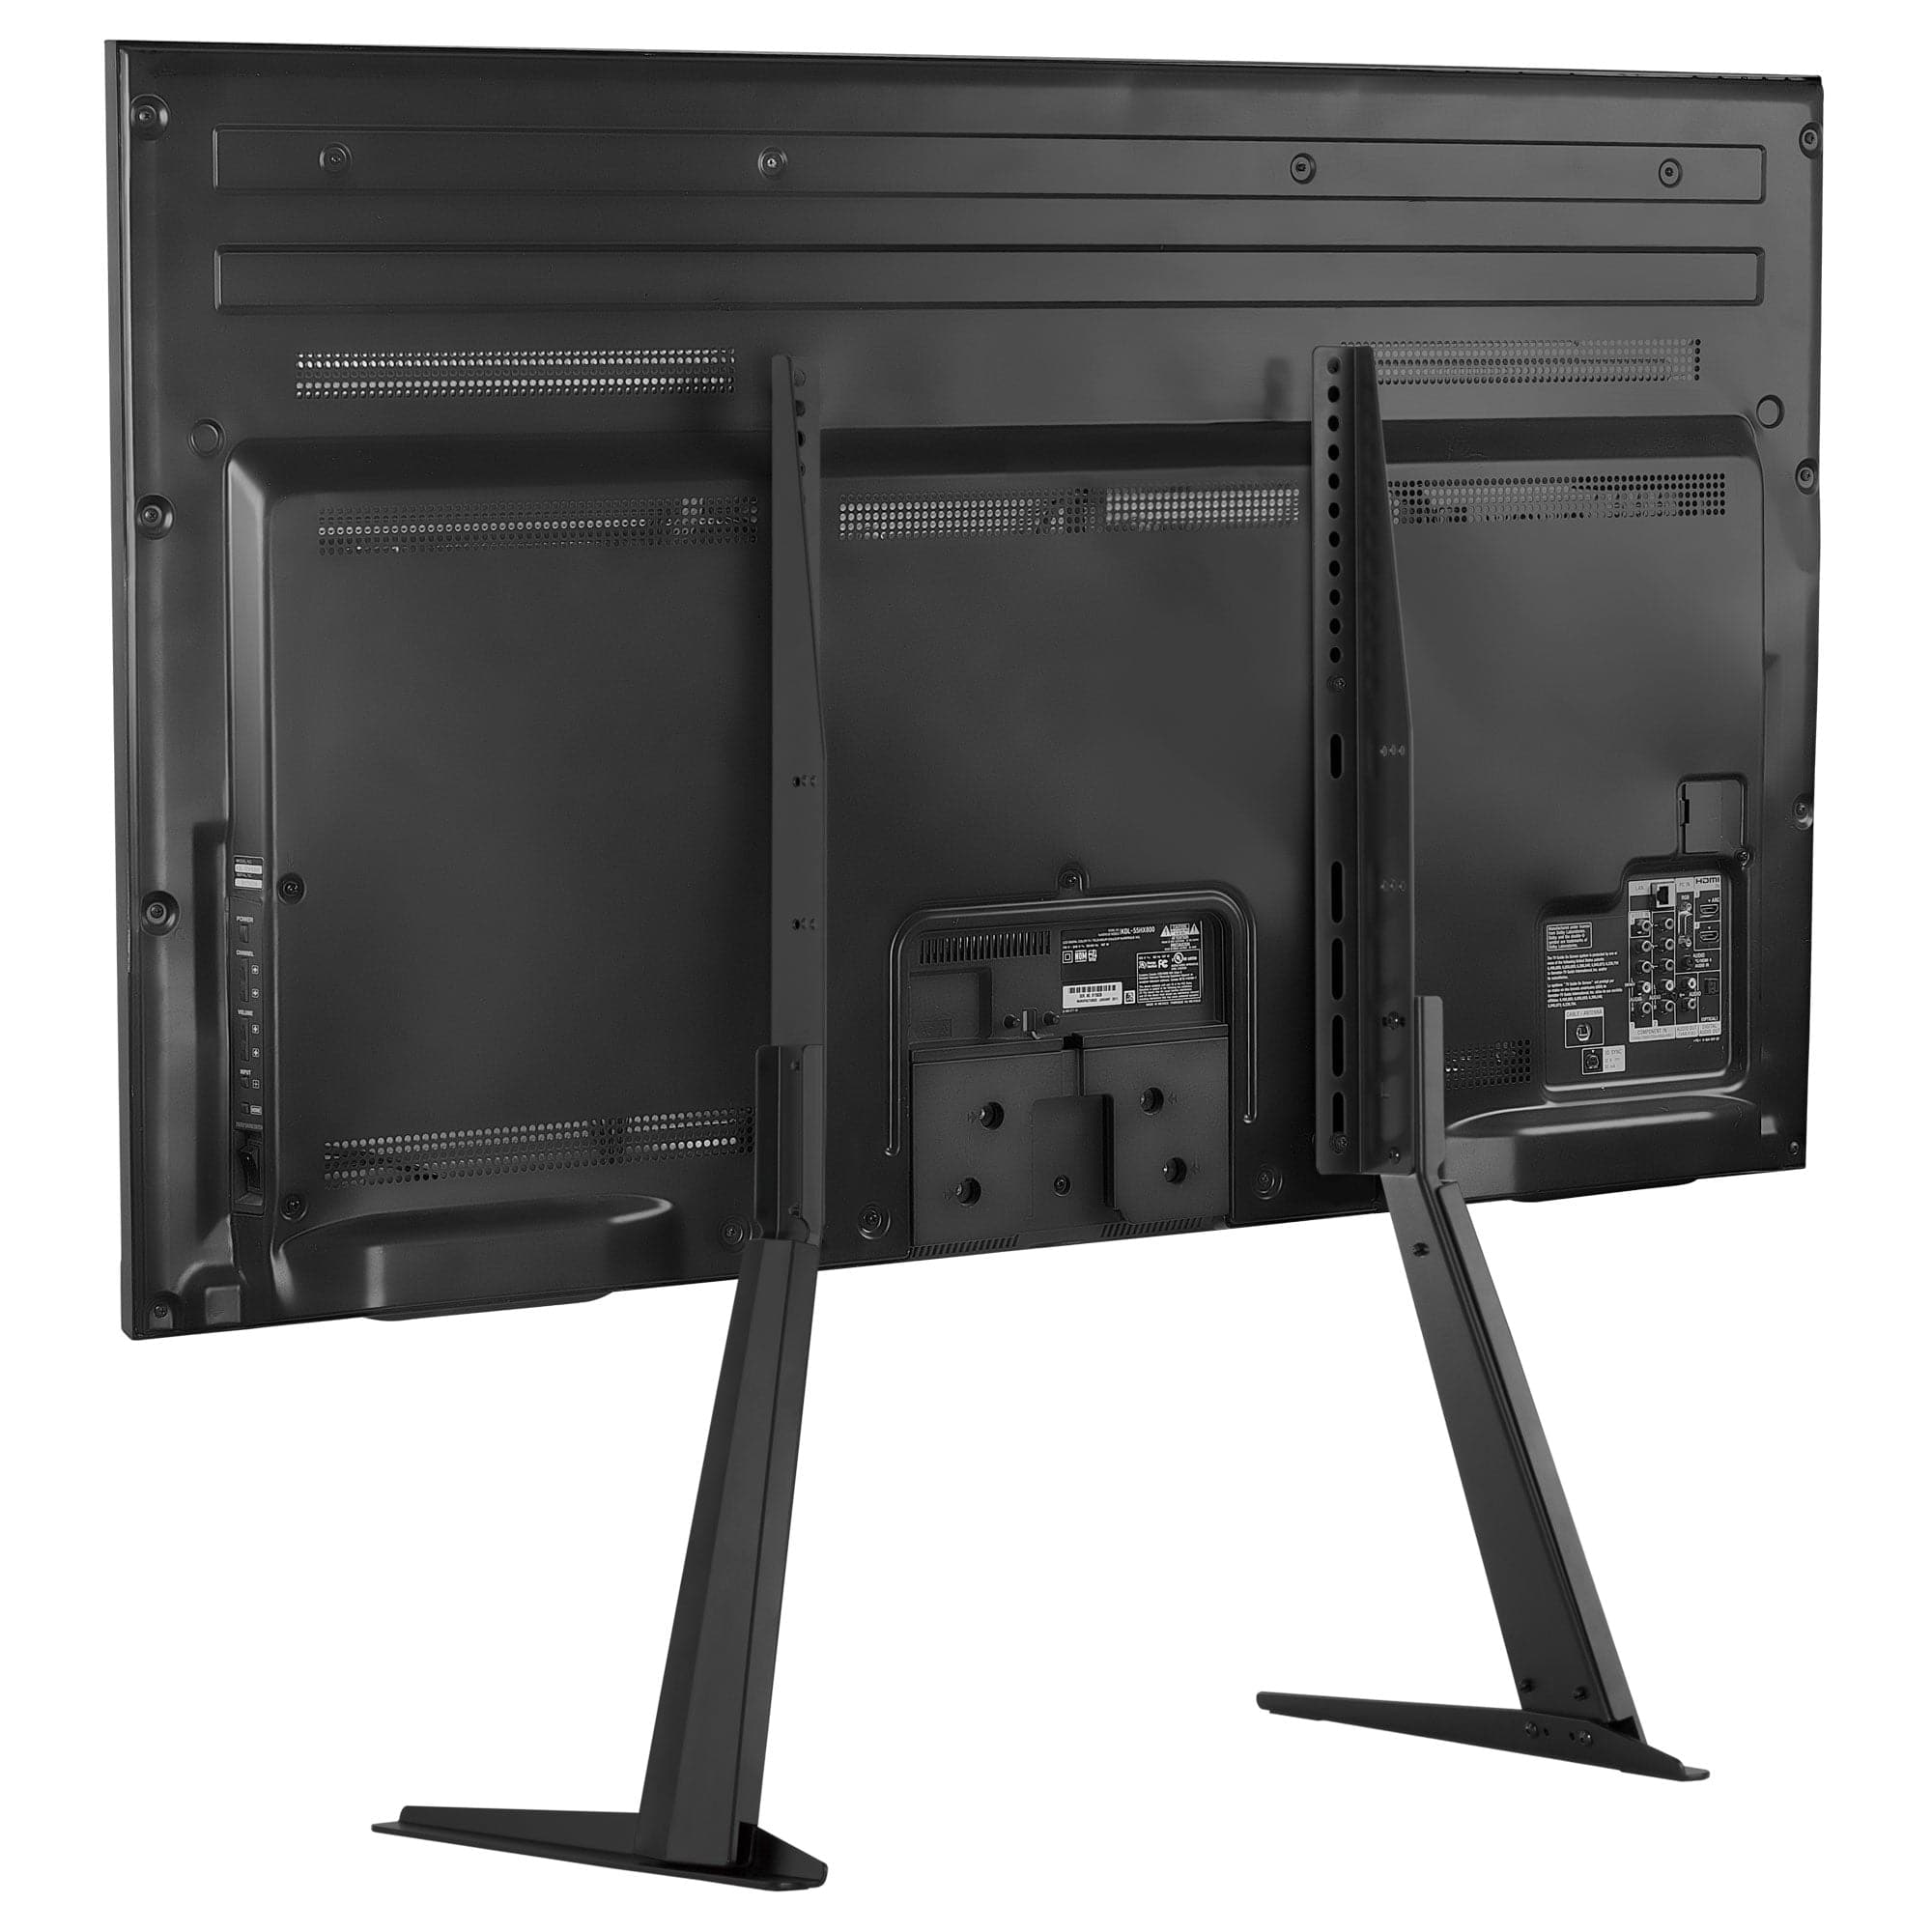 Universal Tilting Table Top TV Stand